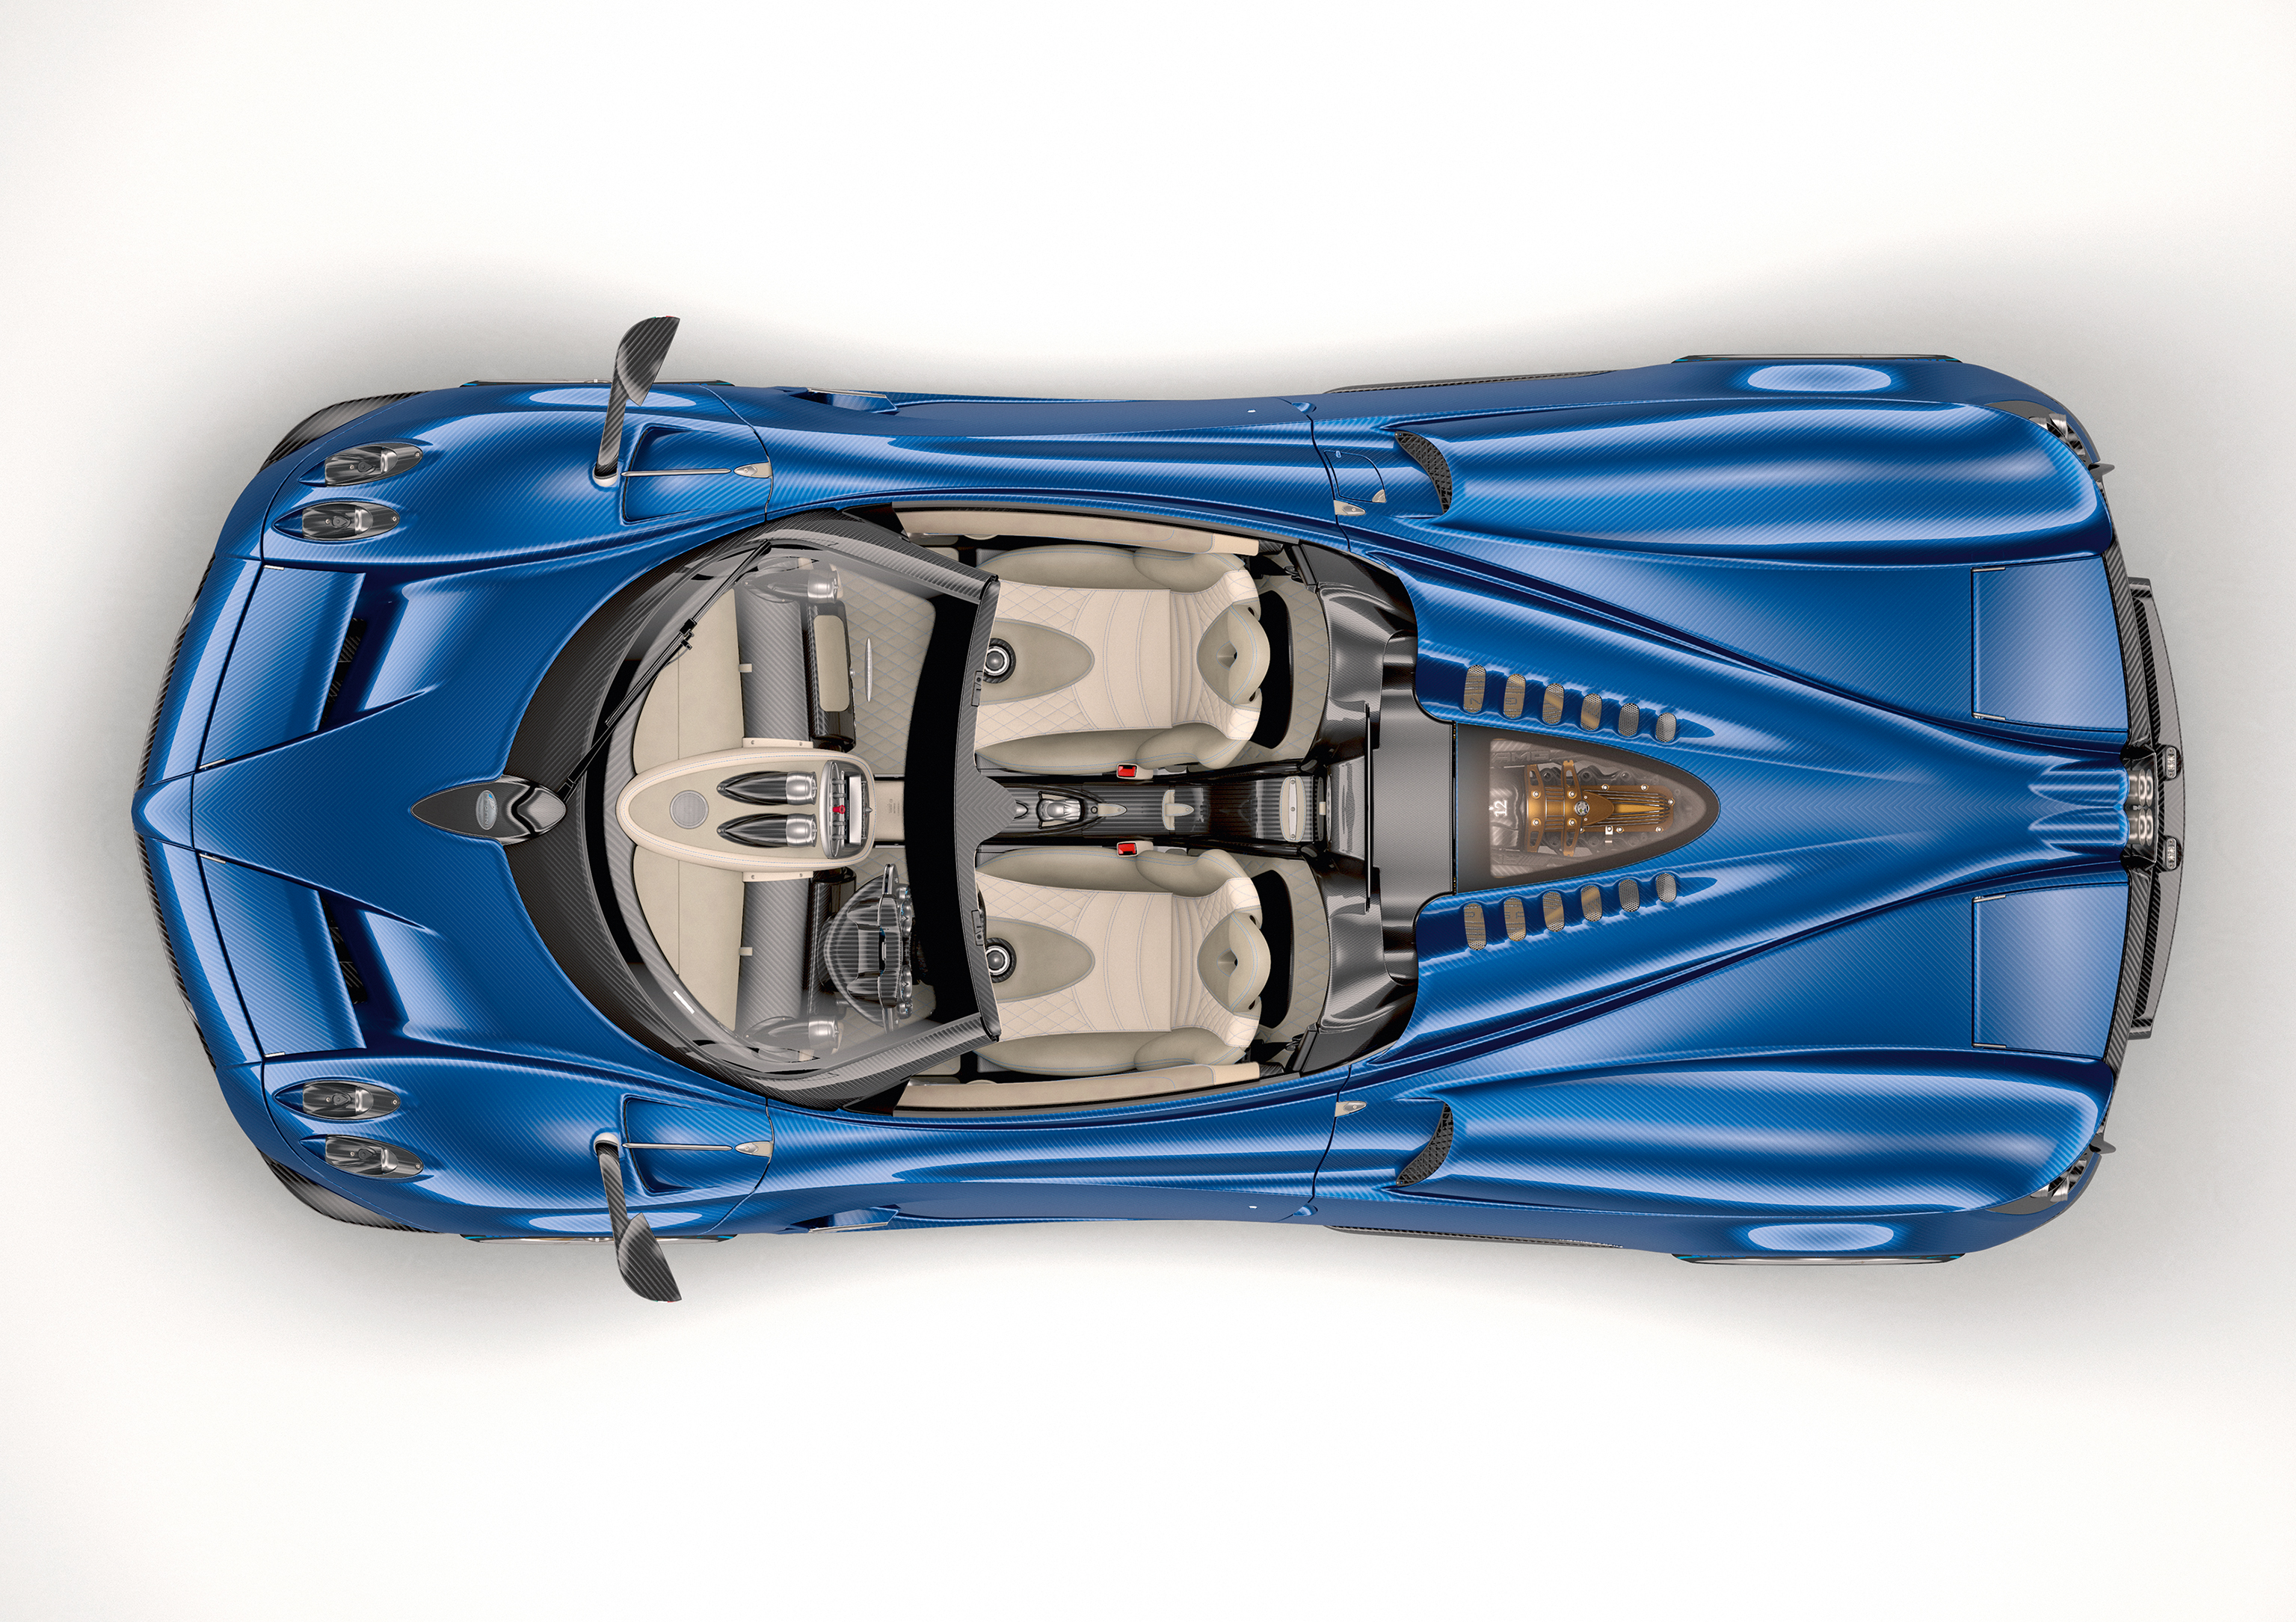 Drop-Top Gorgeous! Pagani's New Huayra Roadster Breaks Cover